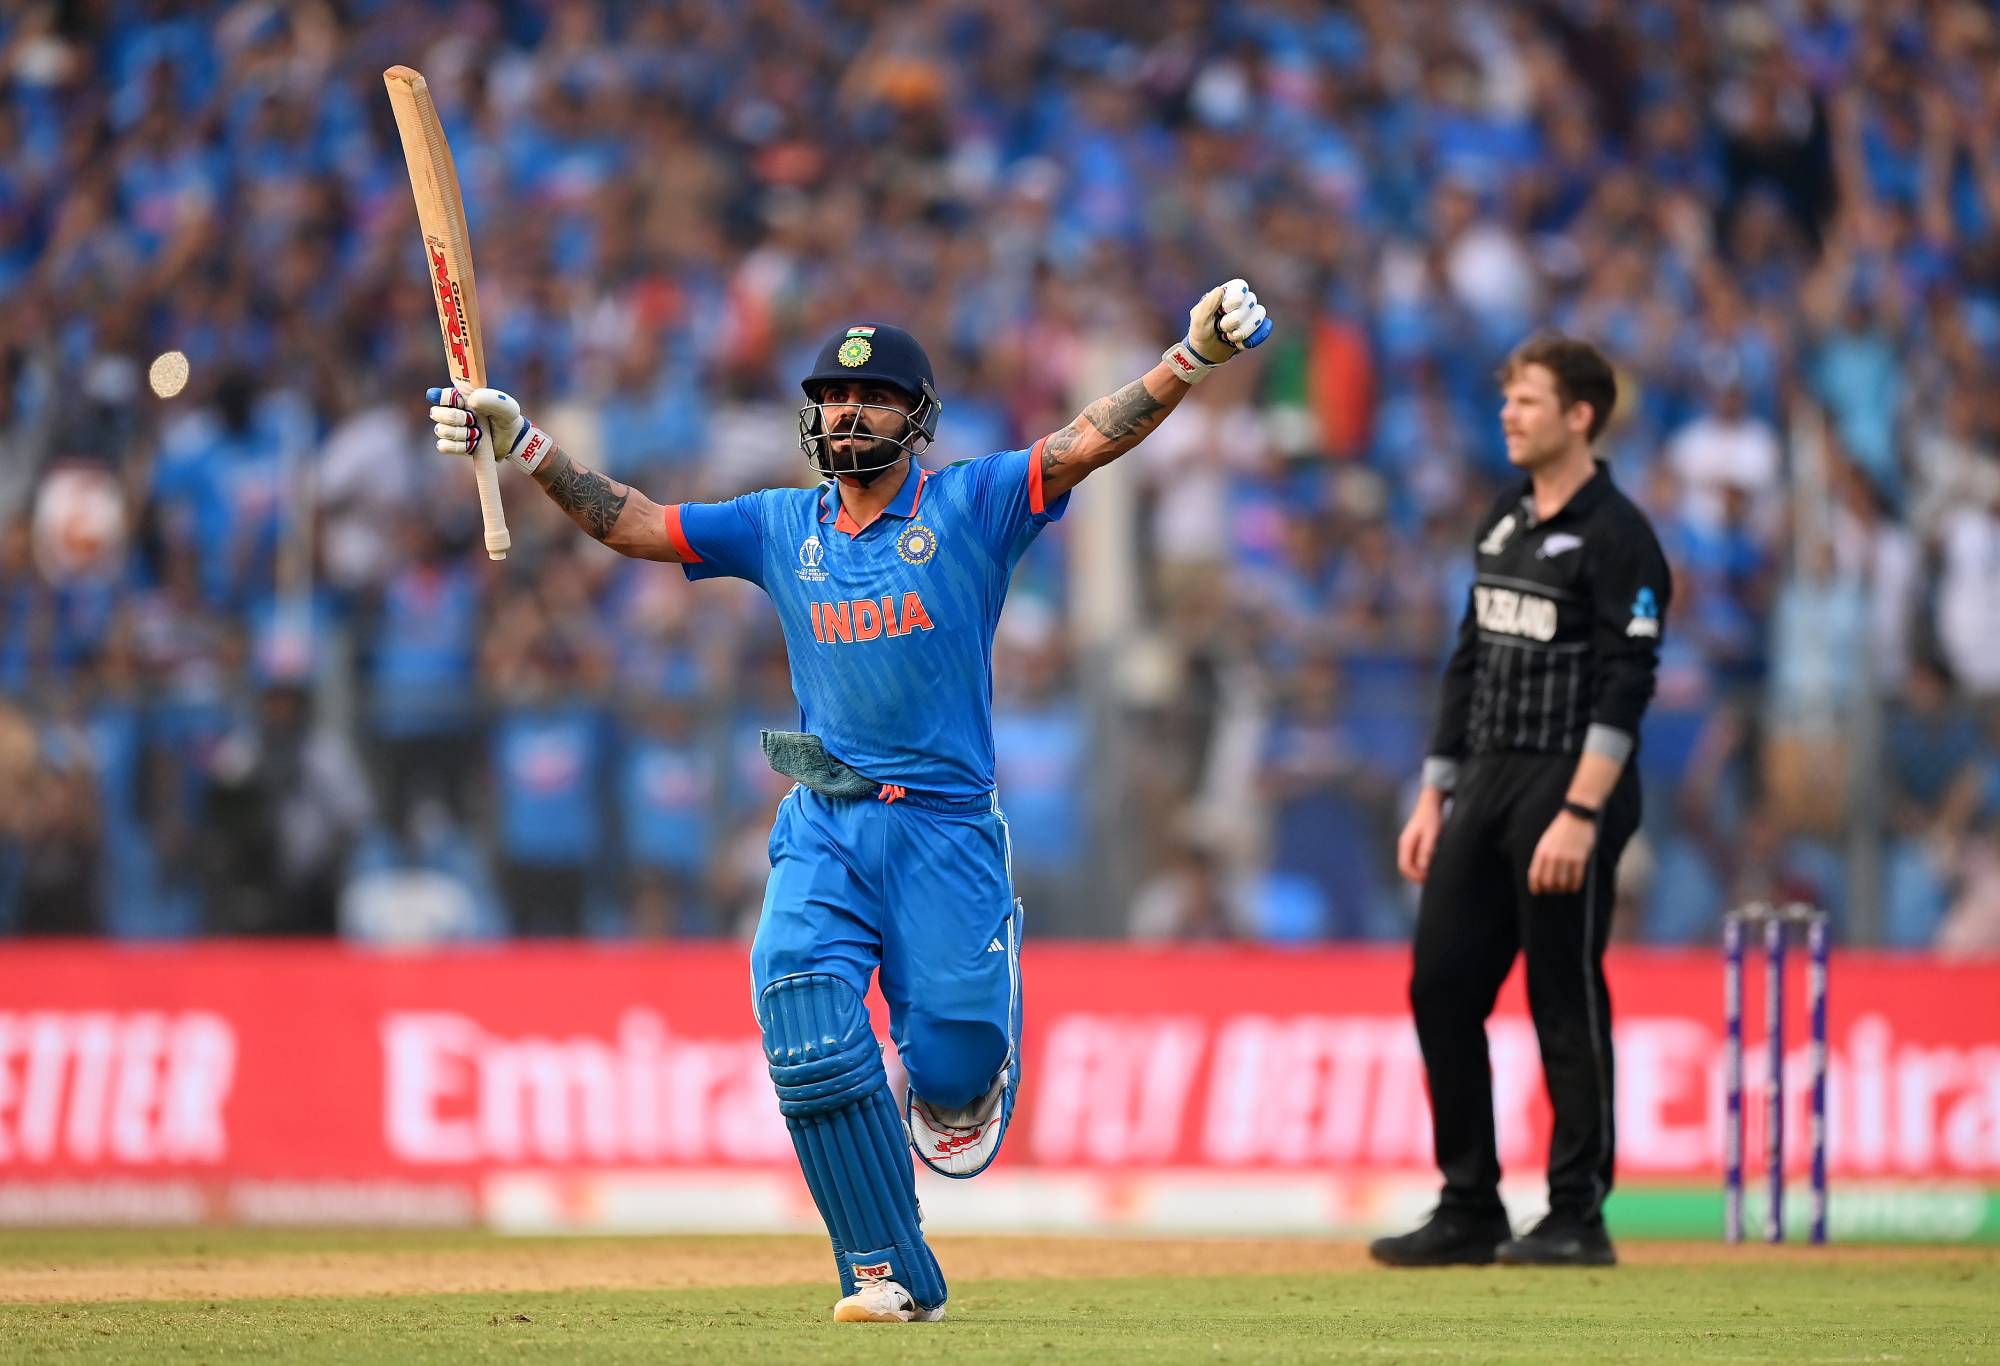 MUMBAI, INDIA - NOVEMBER 15: Virat Kohli of India celebrates after scoring a century, overtaking Sachin Tendulkar for the all time most ODI centuries during the ICC Men's Cricket World Cup India 2023 Semi Final match between India and New Zealand at Wankhede Stadium on November 15, 2023 in Mumbai, India. (Photo by Alex Davidson-ICC/ICC via Getty Images)